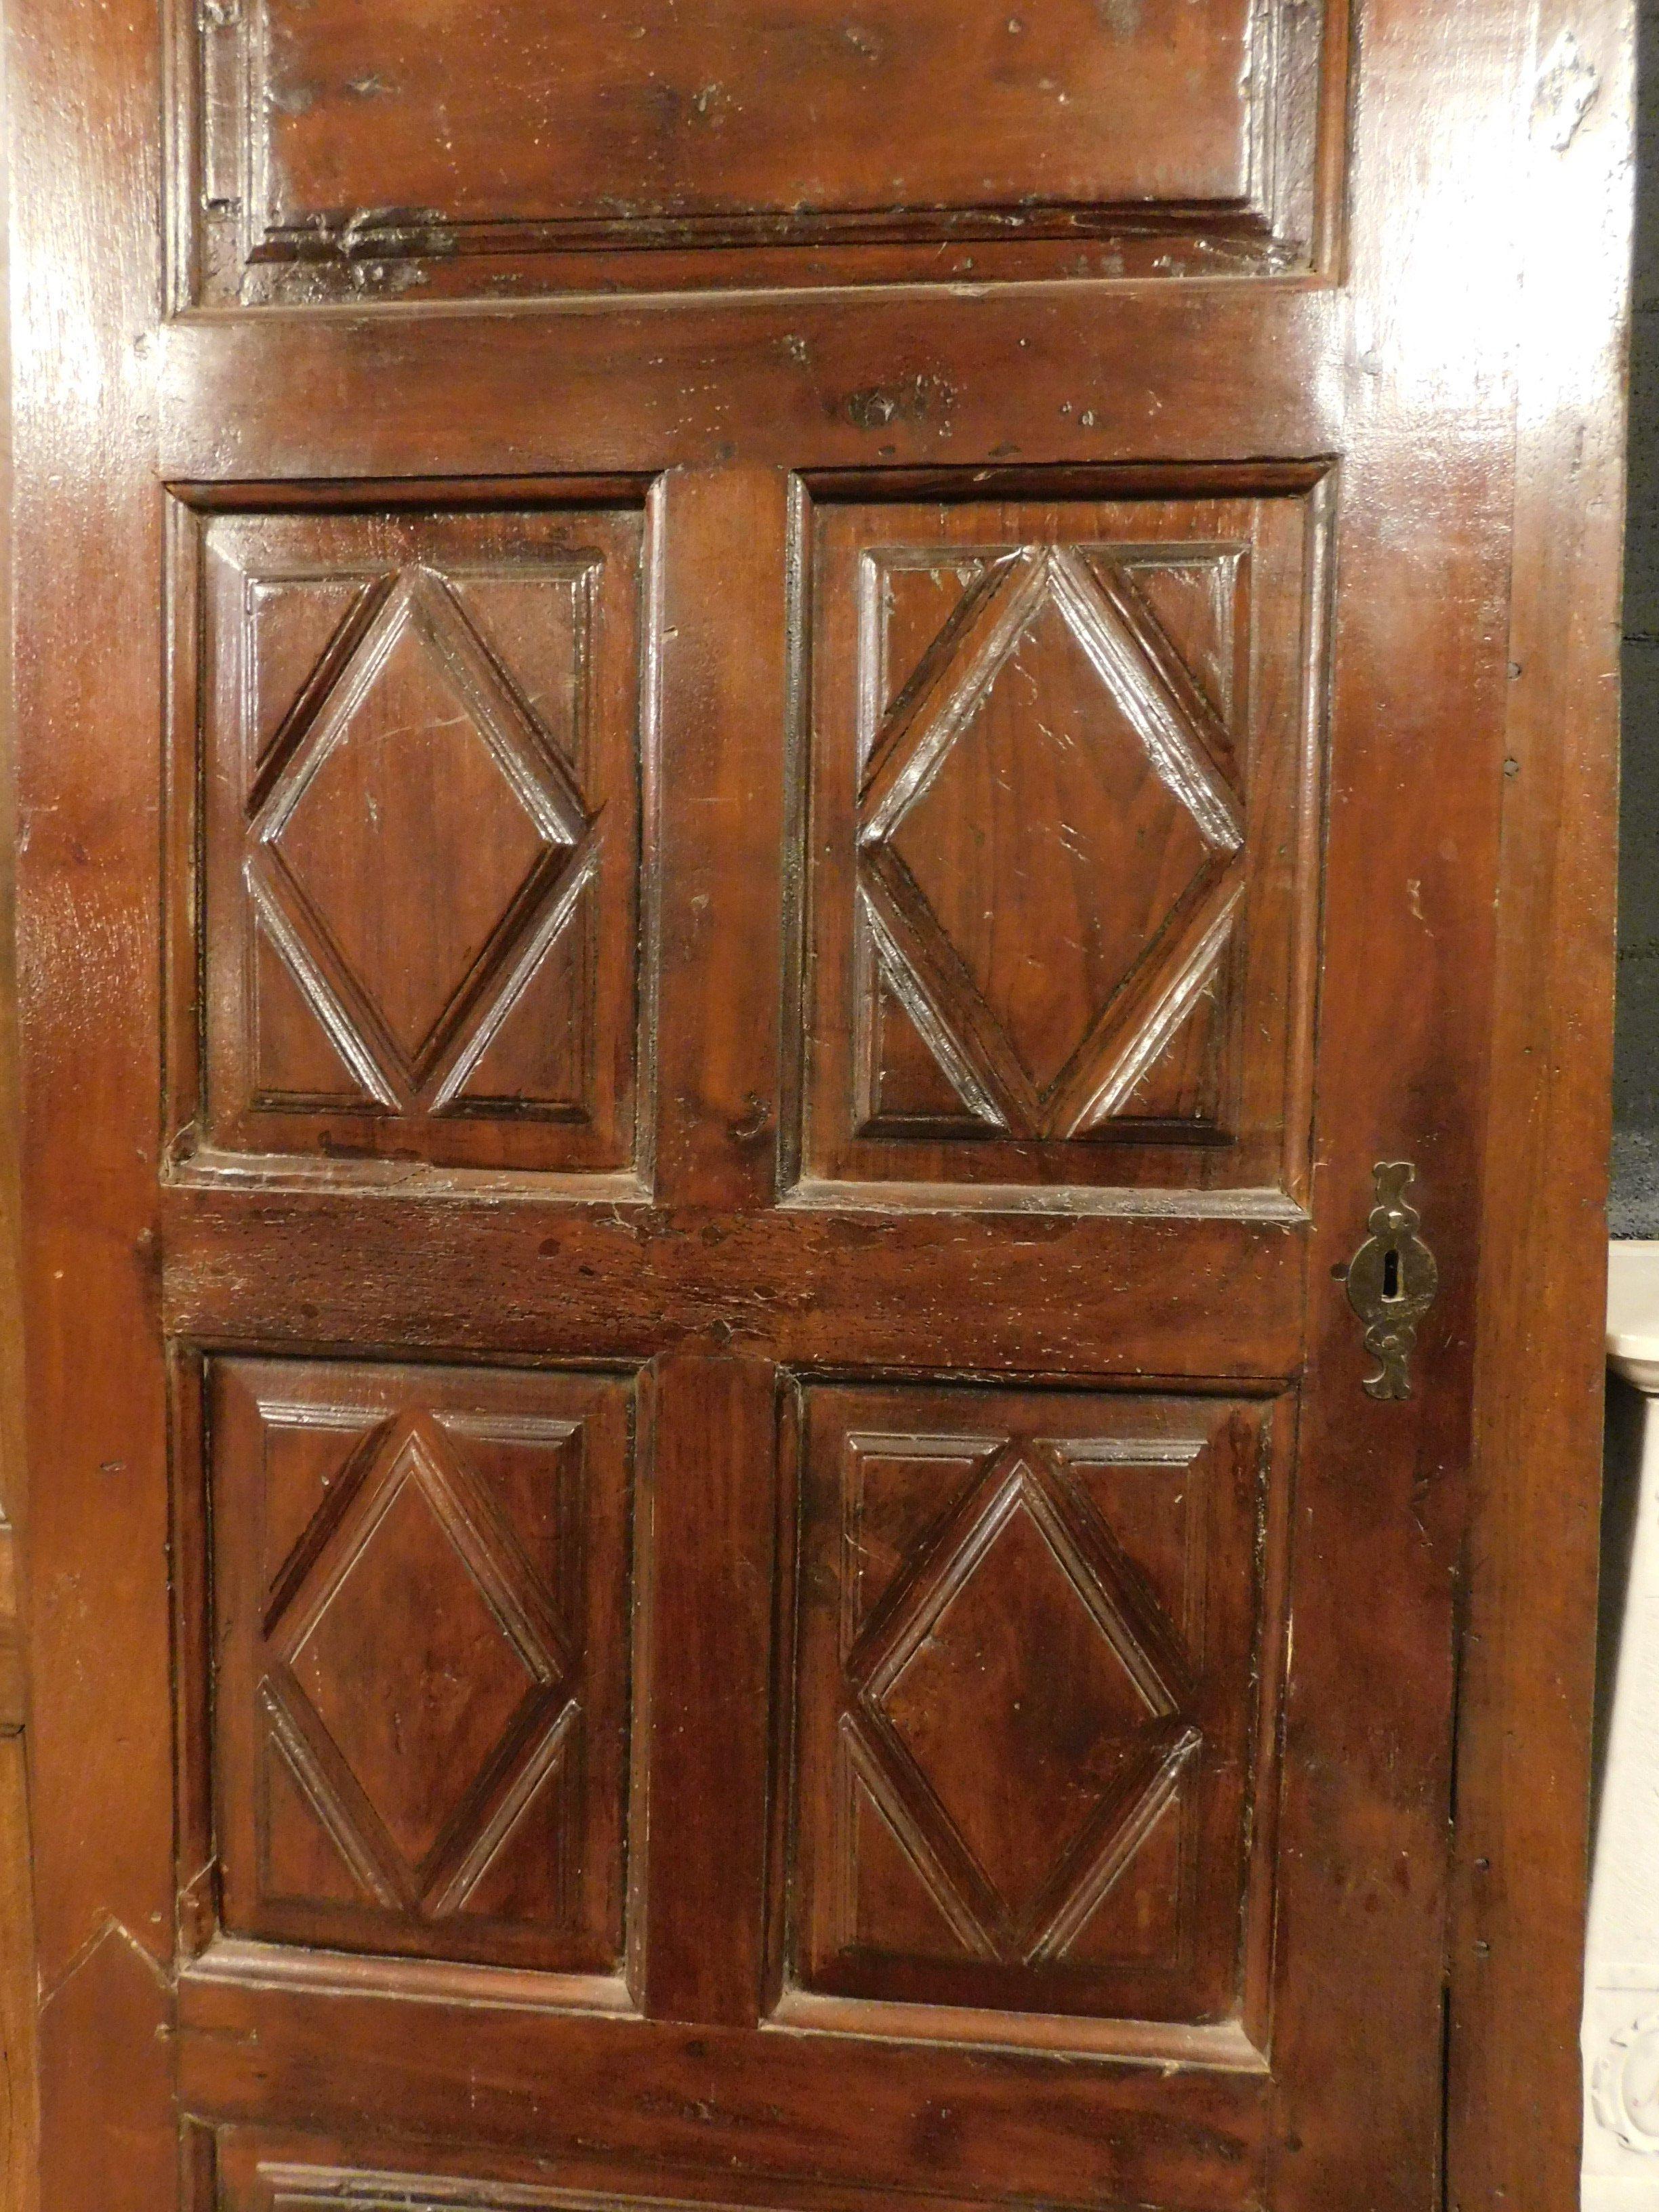 Italian Antique Internal Door in Walnut with Six Hand-Carved Panels, 18th Century Italy For Sale